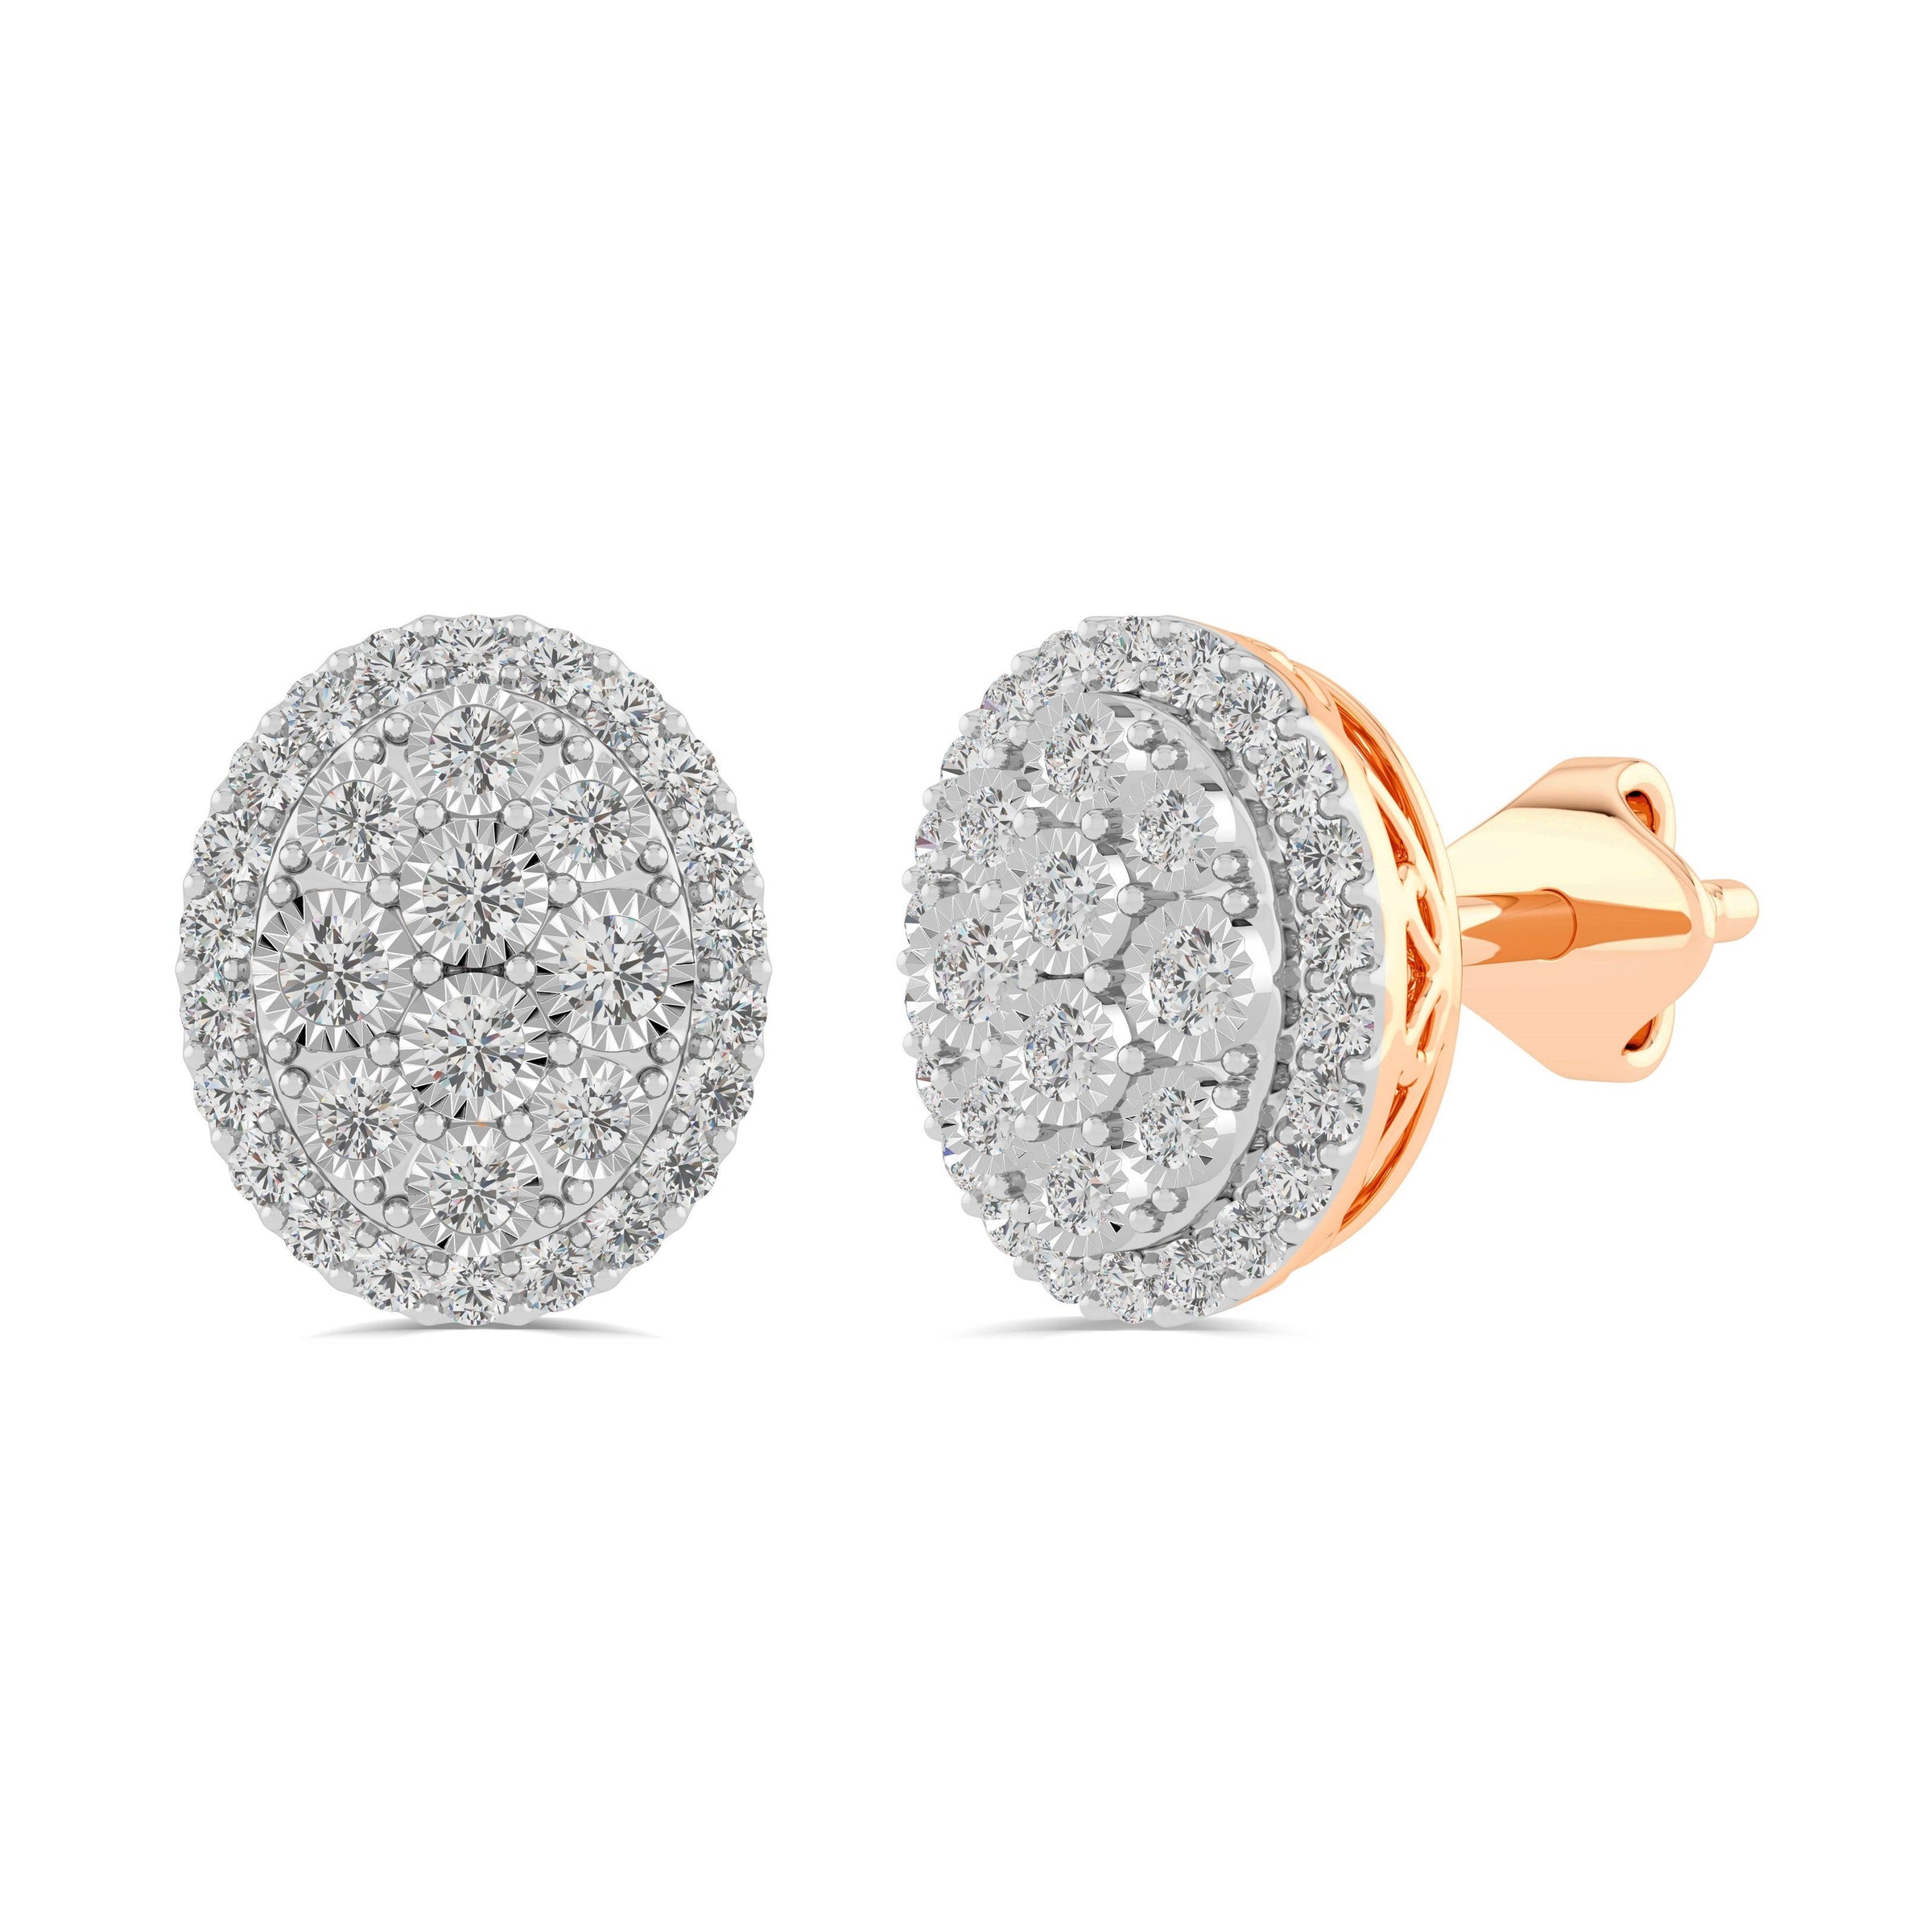 Oval Halo Stud Earrings with 3/4ct of Diamonds in 9ct Rose Gold Earrings Bevilles Jewellers 